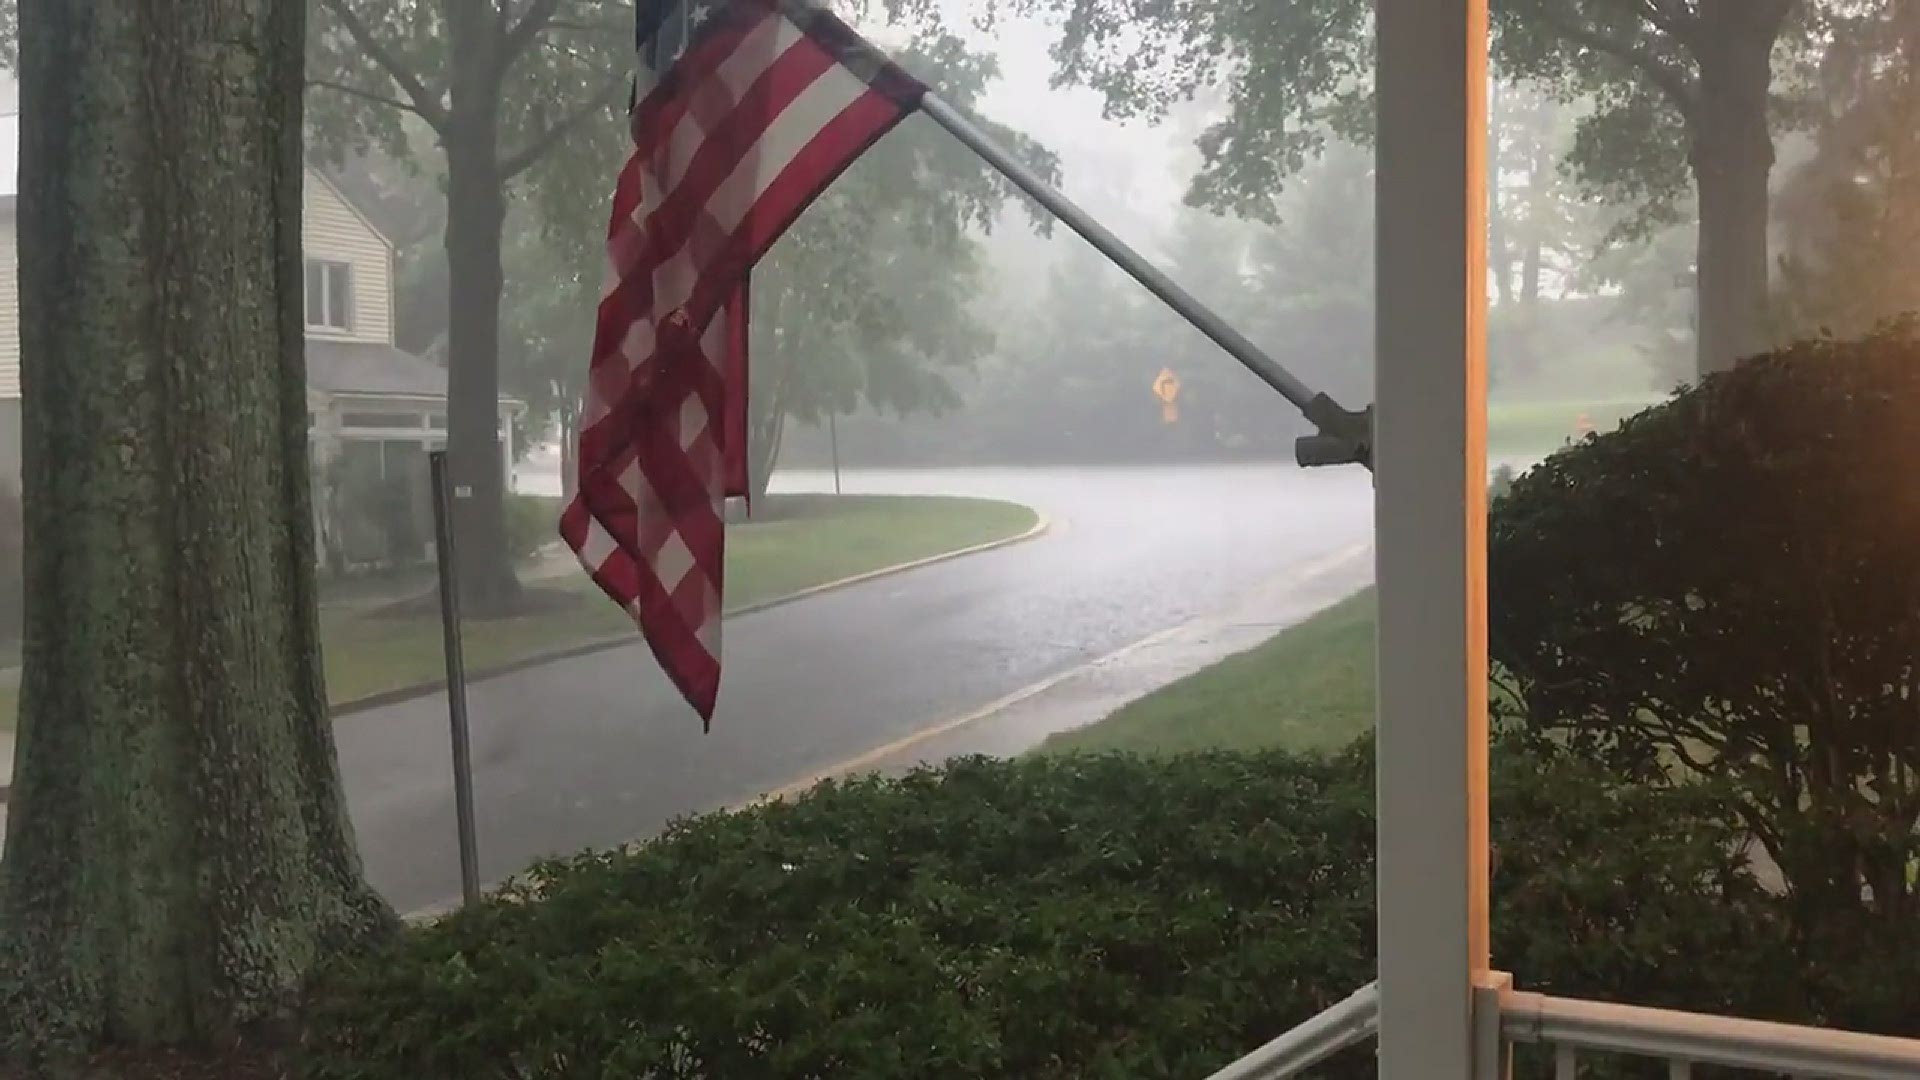 Be careful Annapolis! The area is experiencing heavy rain and lightning.
Credit: Samara Martin Ewing